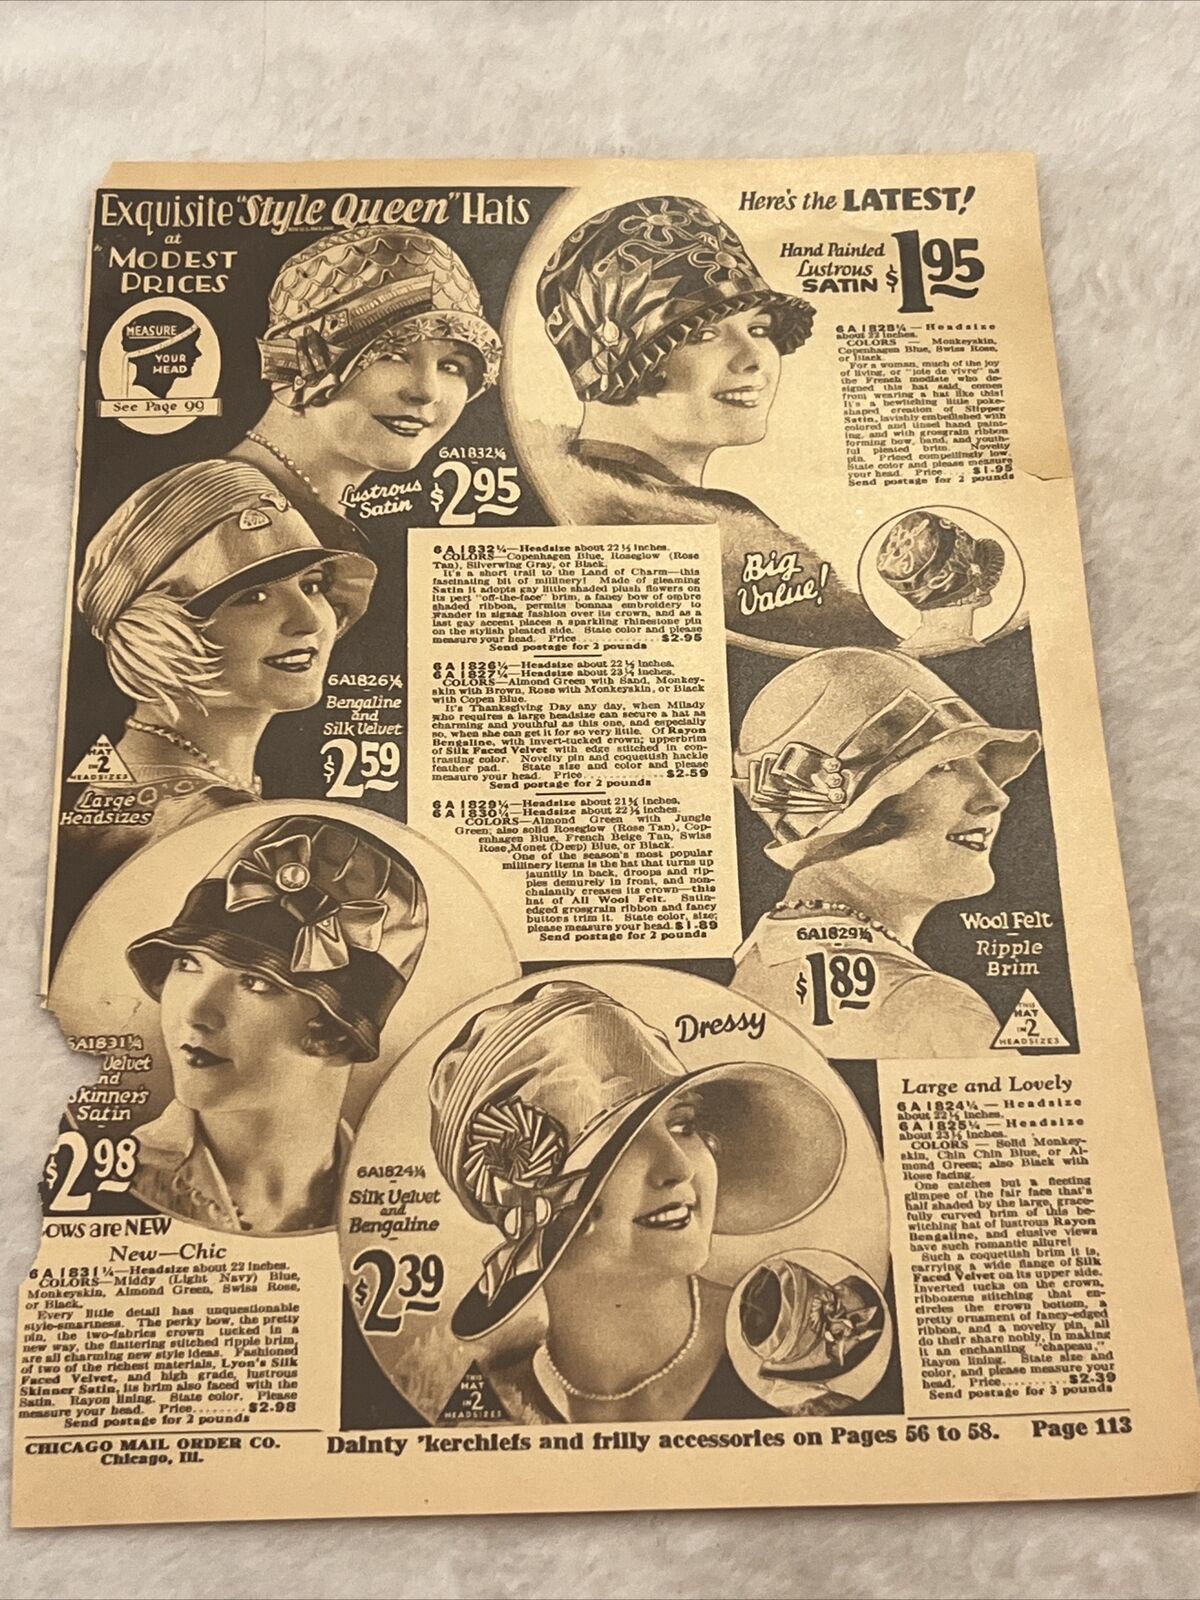 vintage Chicago Mail Order Co. Exquisite “Style Queen” Hats ad FD9